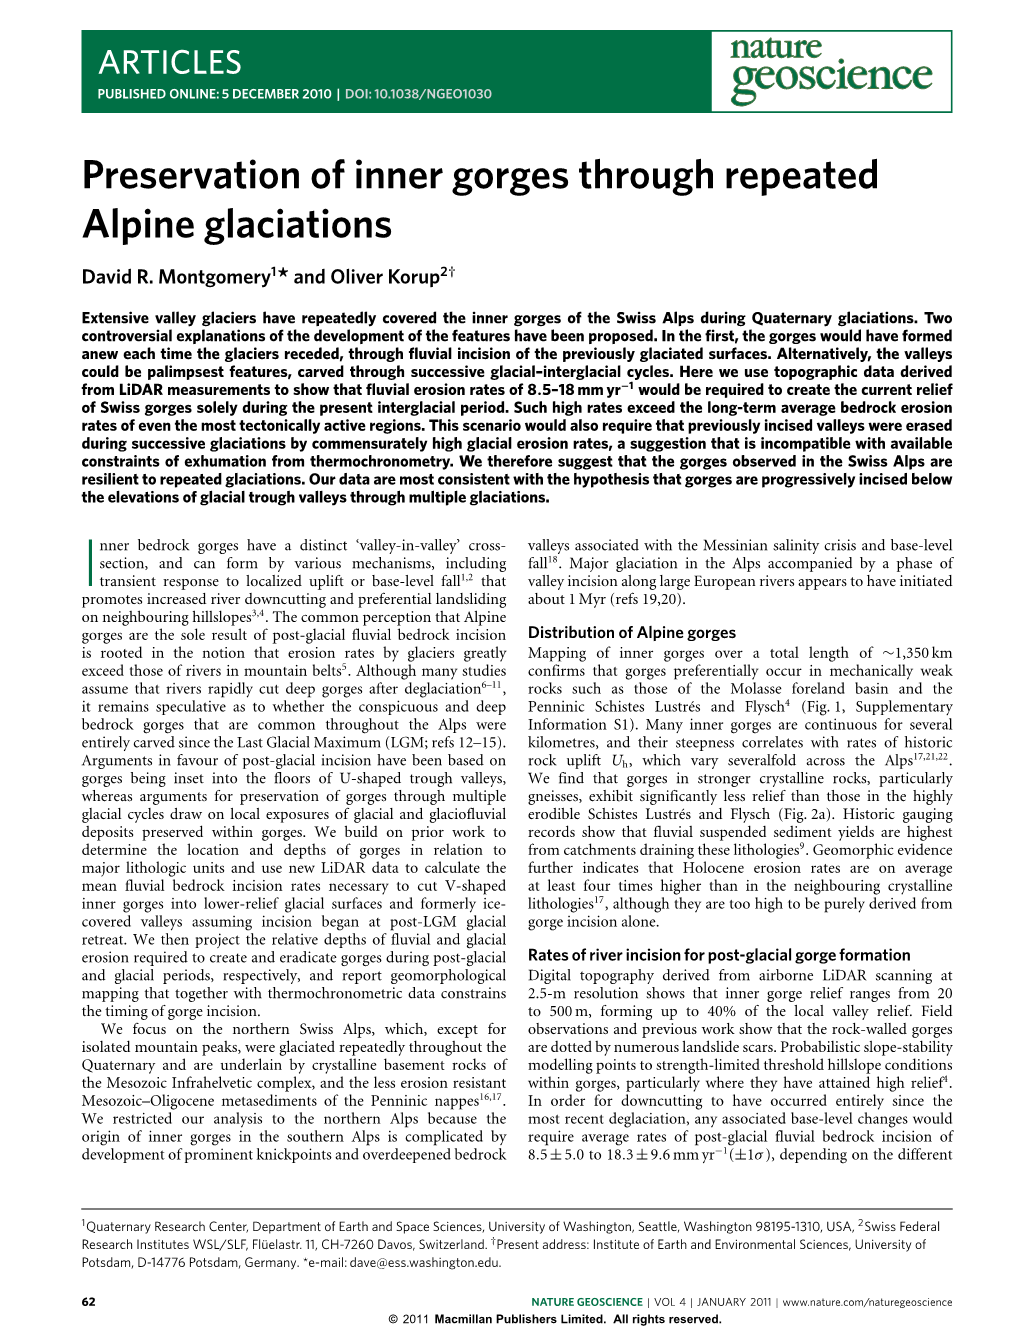 Preservation of Inner Gorges Through Repeated Alpine Glaciations David R